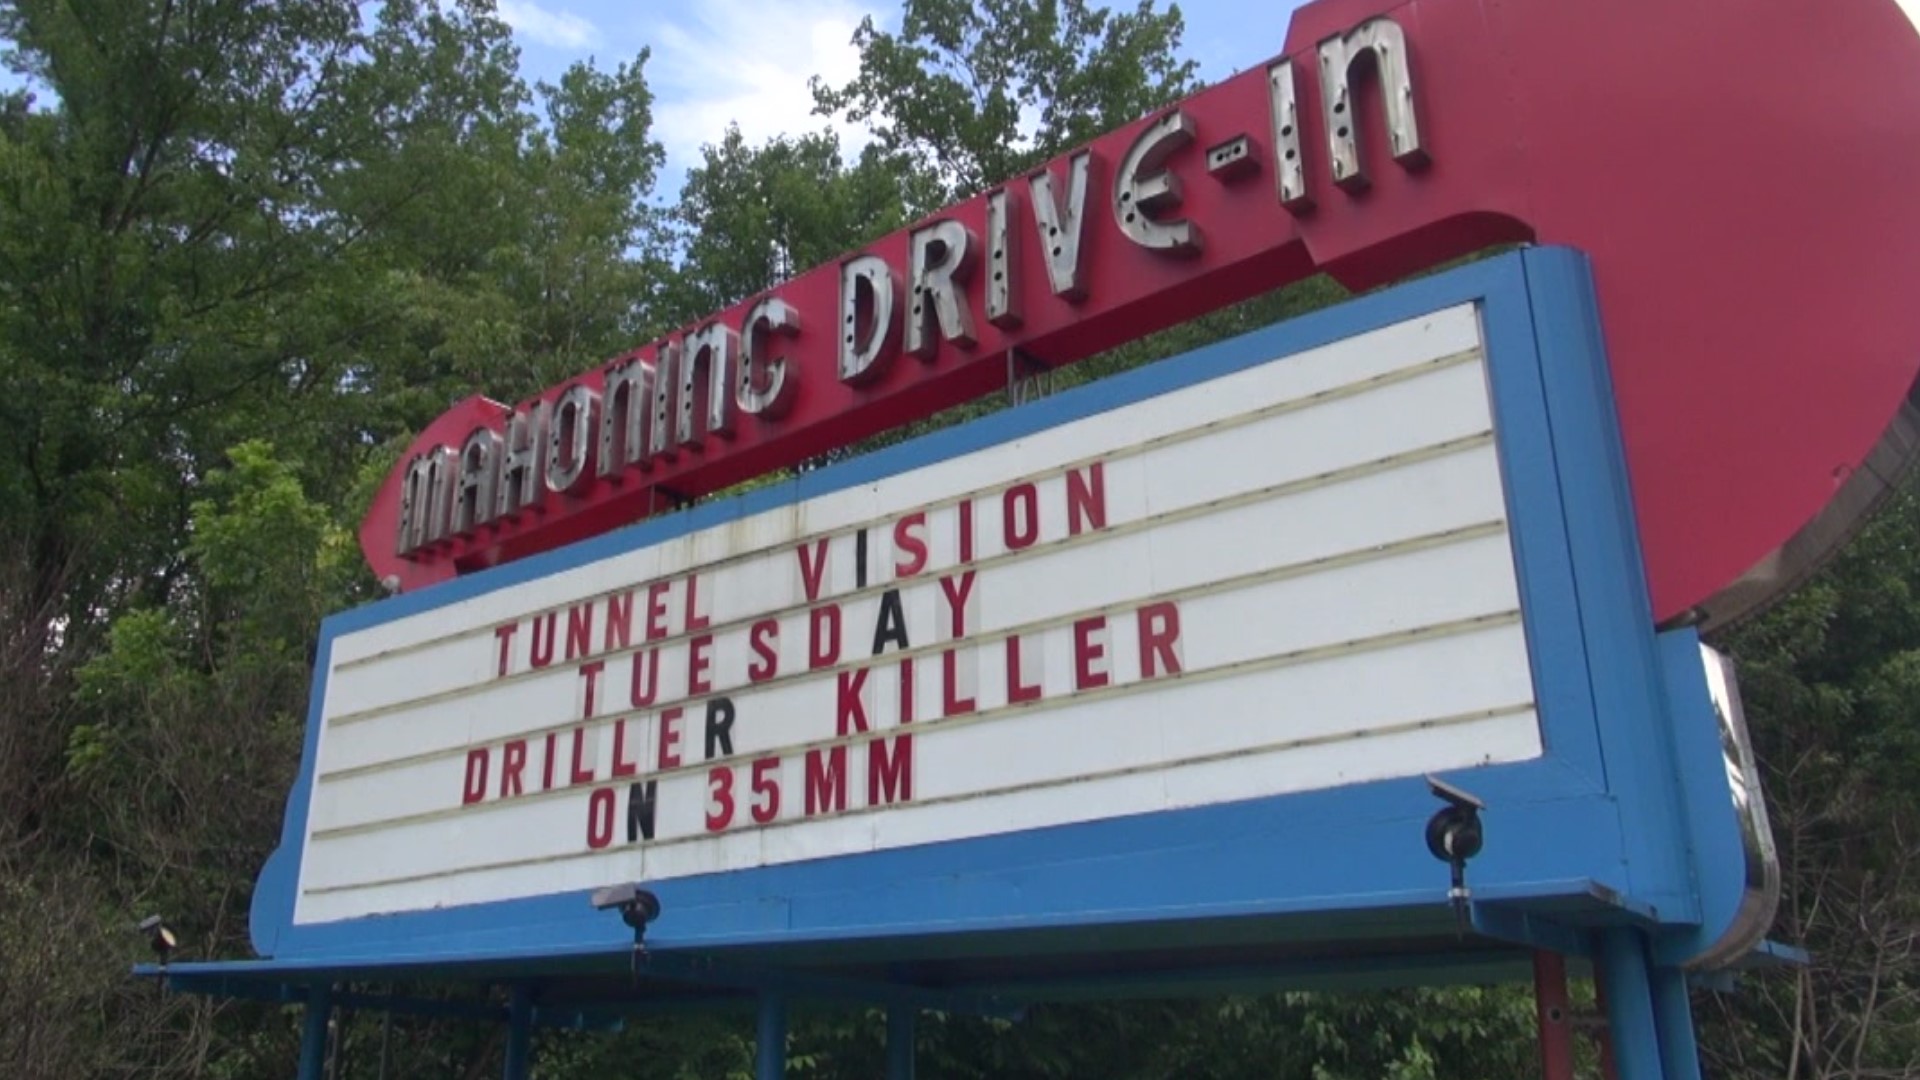 The team that runs the legendary drive-in leases the land, and now the owner wants to lease it to a solar energy company instead, which would close the drive-in.